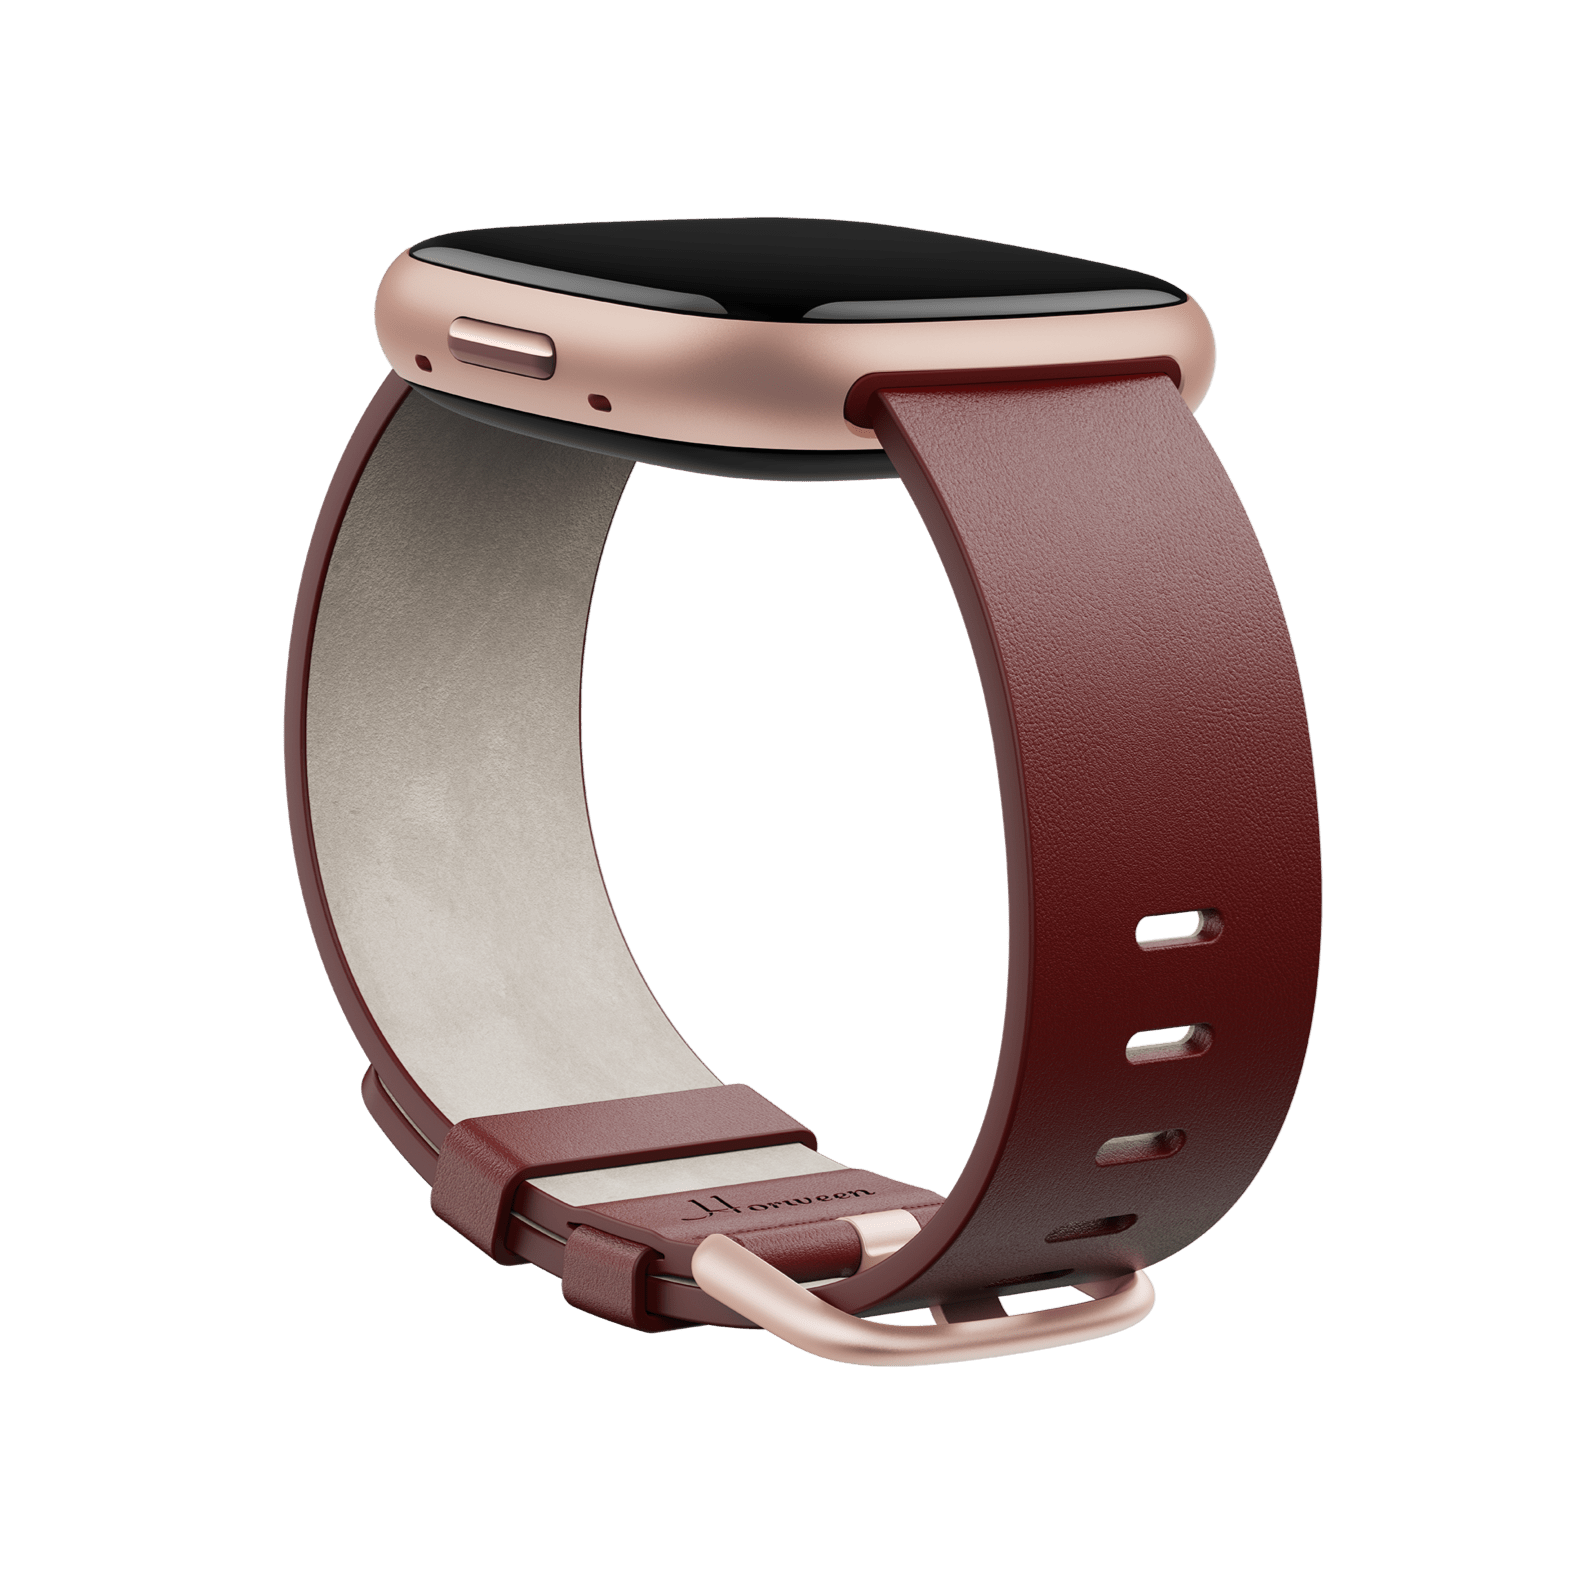 waterfail Watchband， for Fitbit Inspire Leather Strap Short Leather Strap Wrist Strap Single Leather Strap 